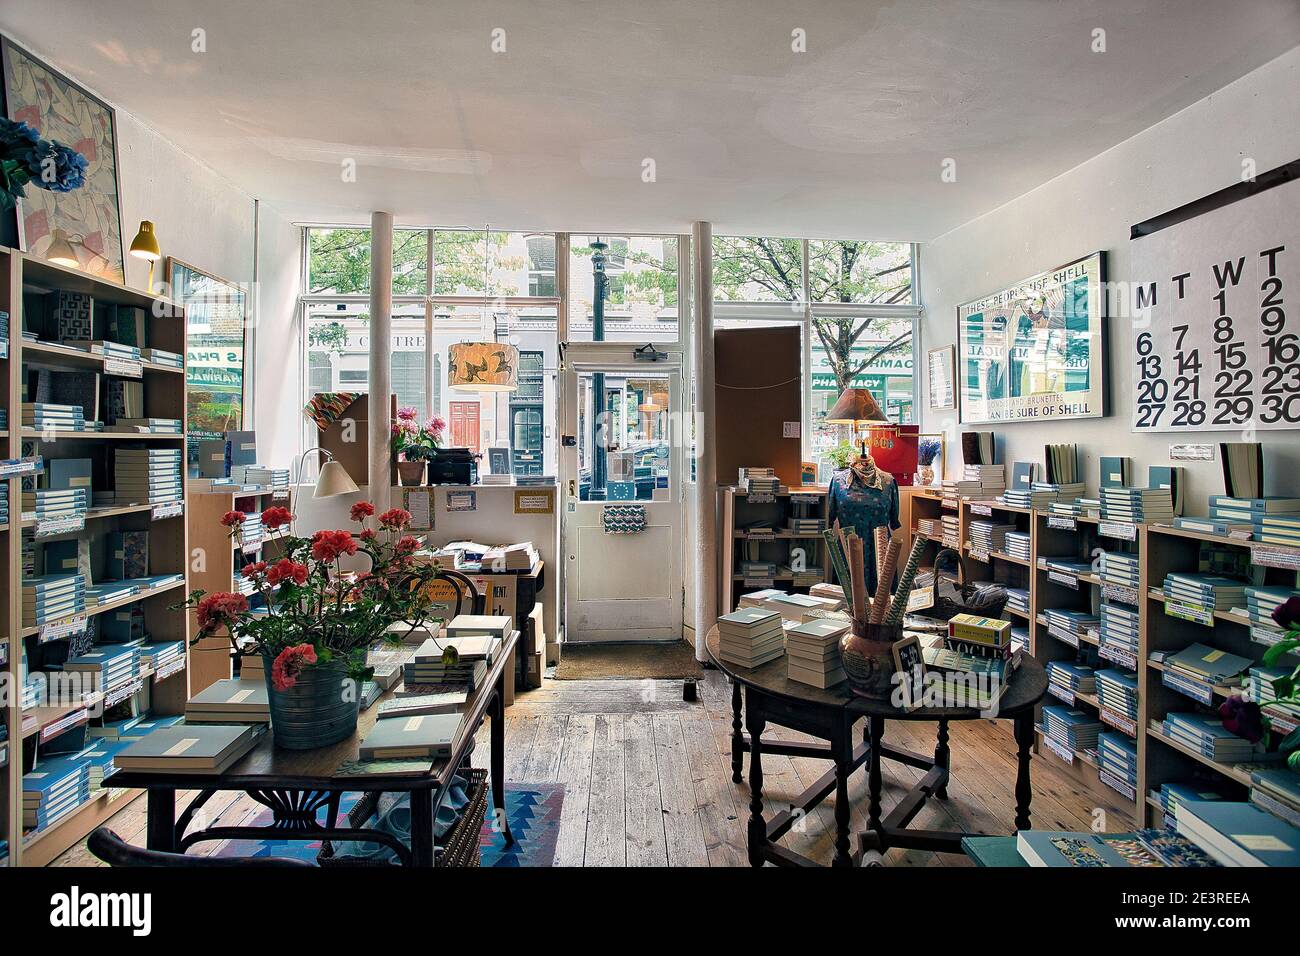 GREAT BRITAN / London / Bookstores / Persephone Books a former independent publisher and bookshop in London. Stock Photo